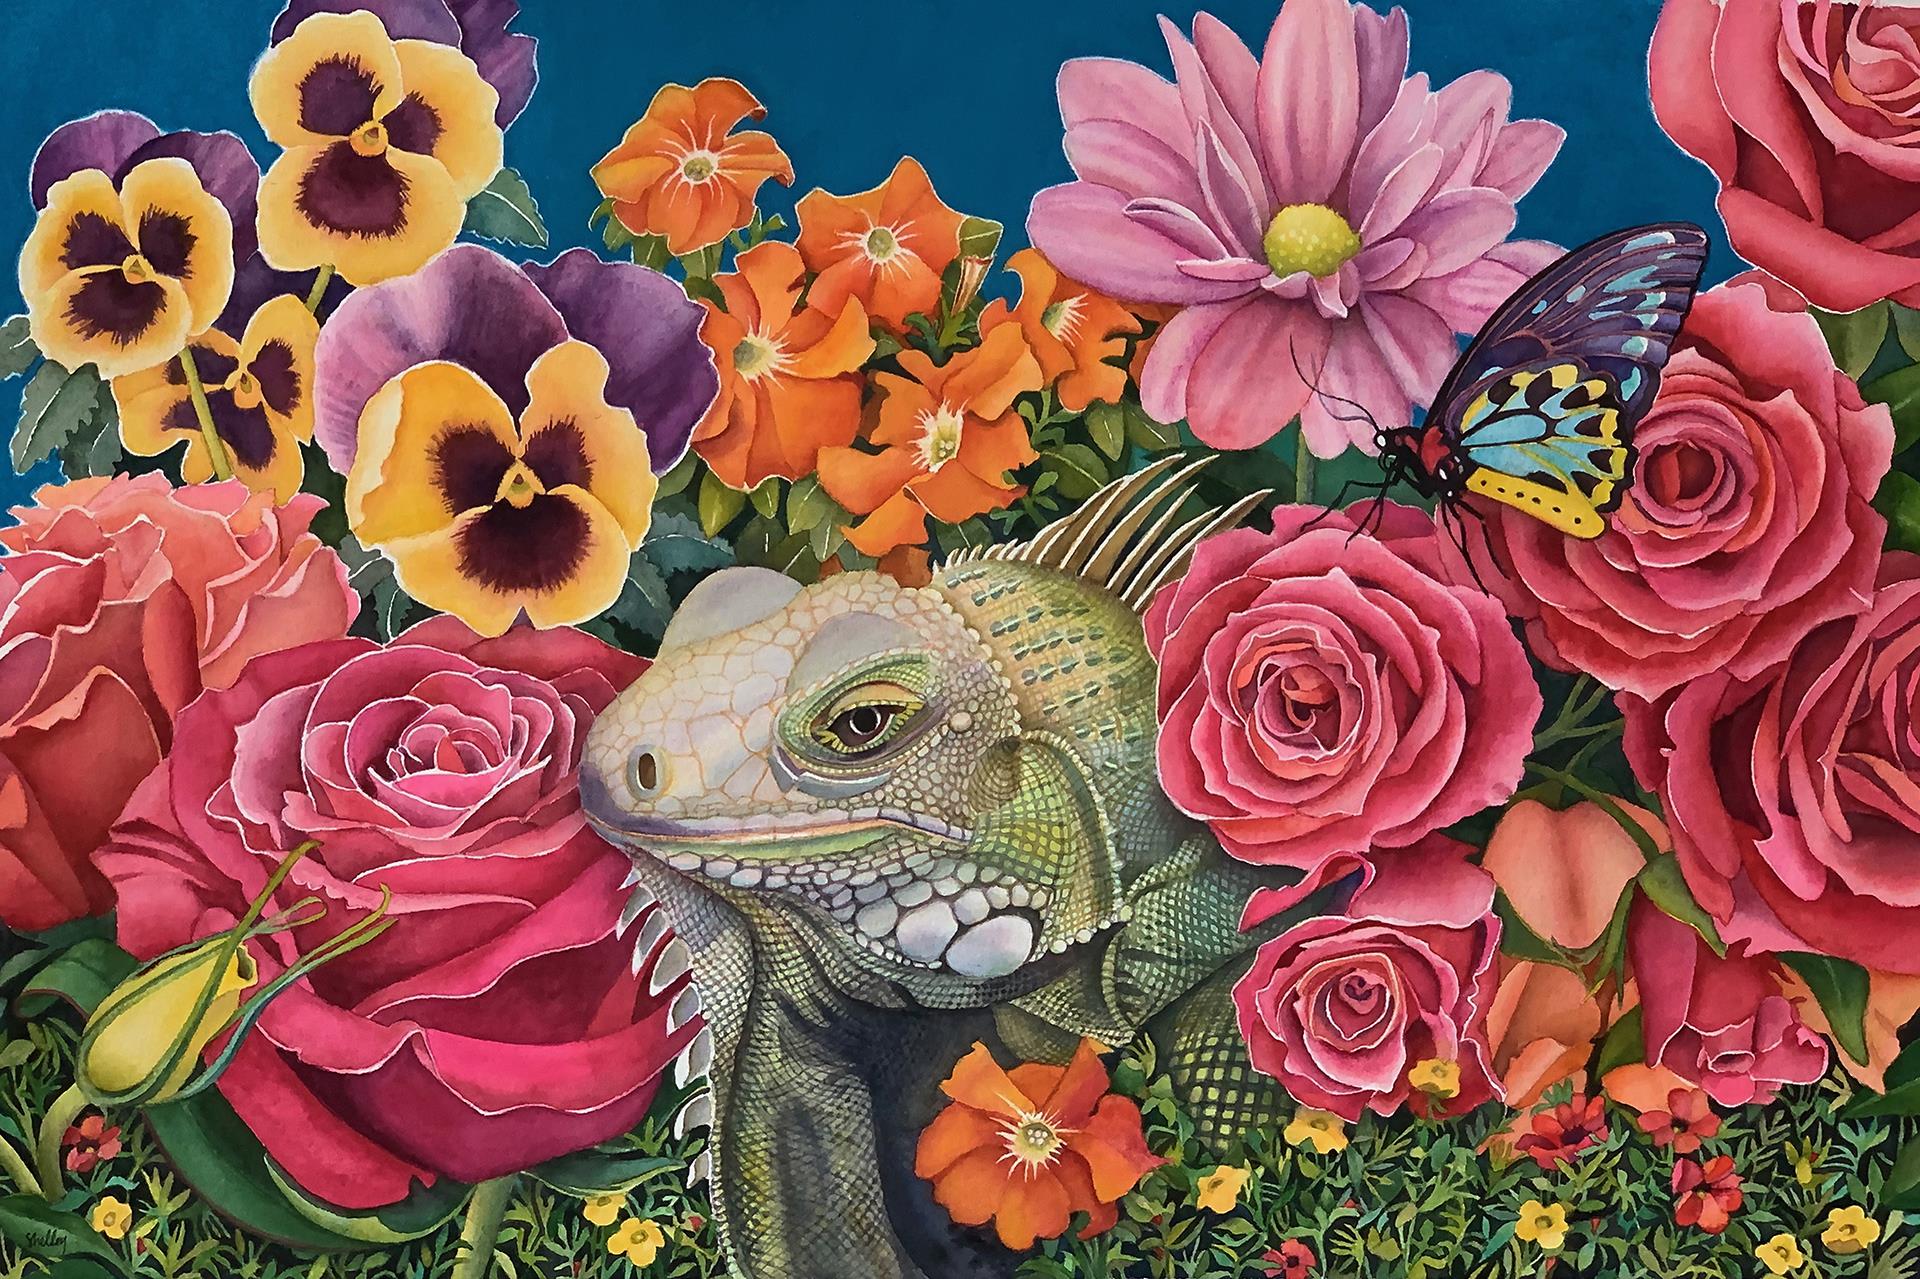 watercolor painting of flowers and iguana